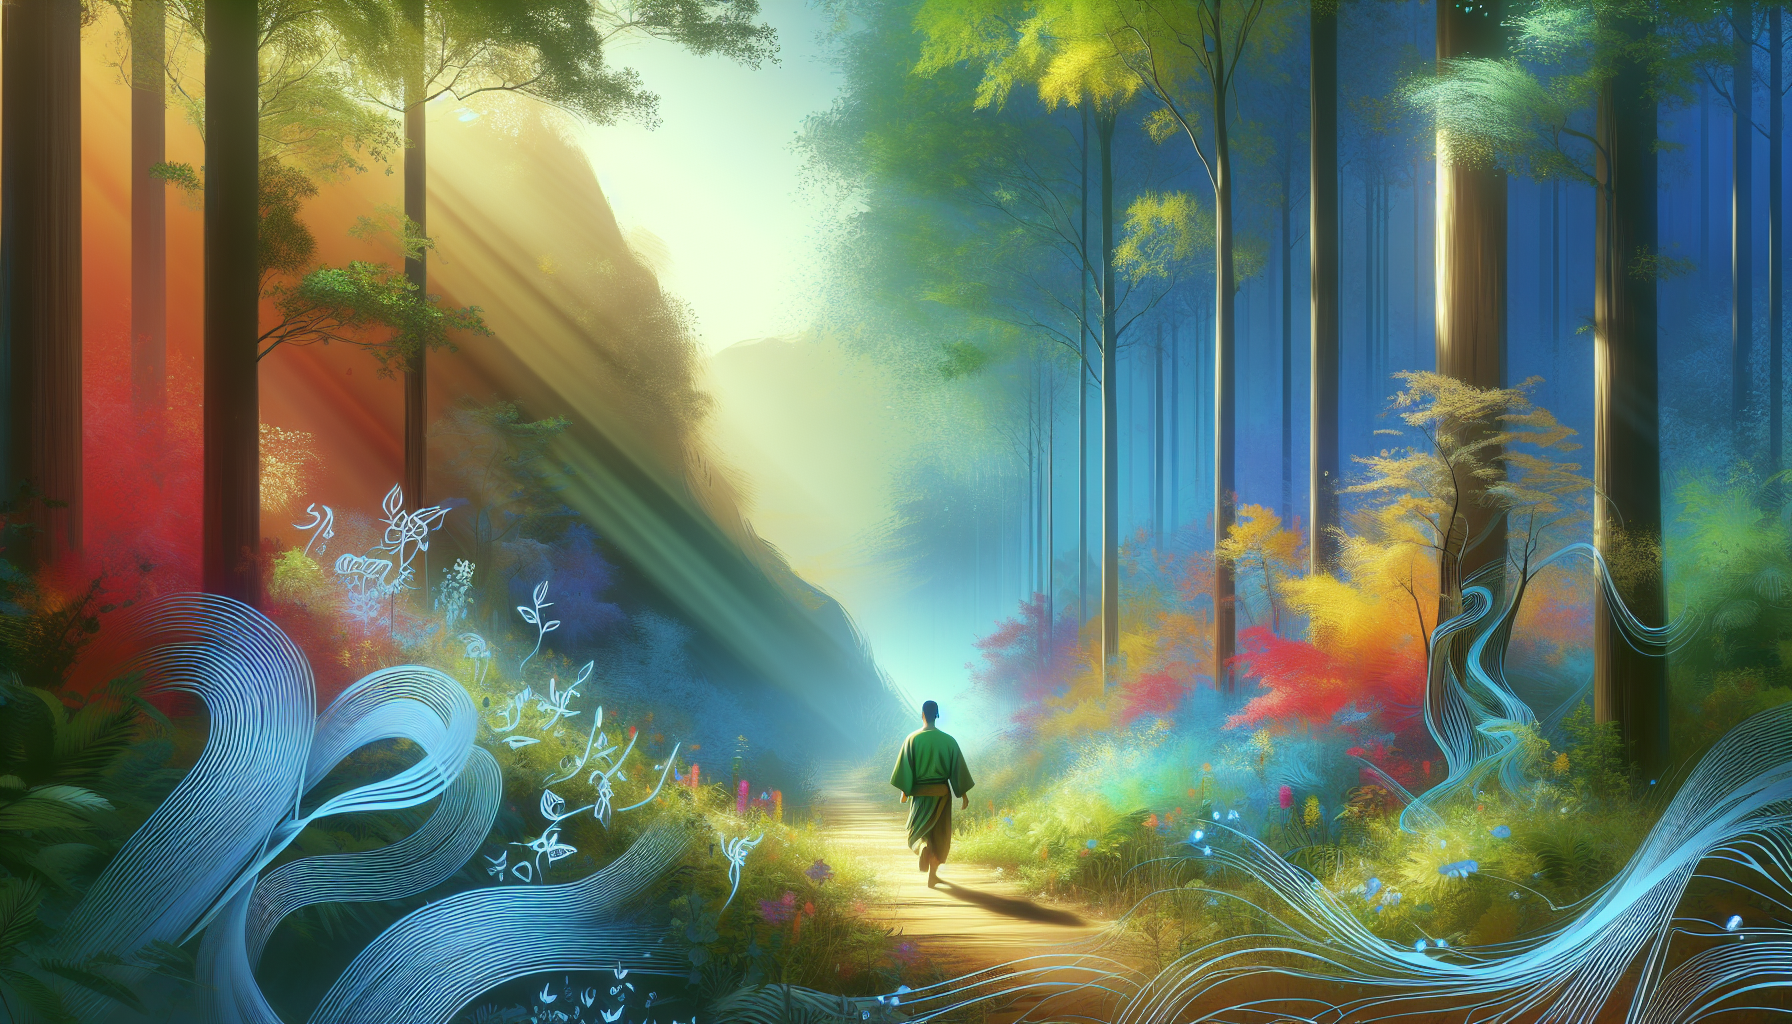 An artistic interpretation of Psalm 119:10, depicting a serene landscape with a person walking along a peaceful path through lush, vibrant forests, symbolizing a spiritual journey and seeking guidance